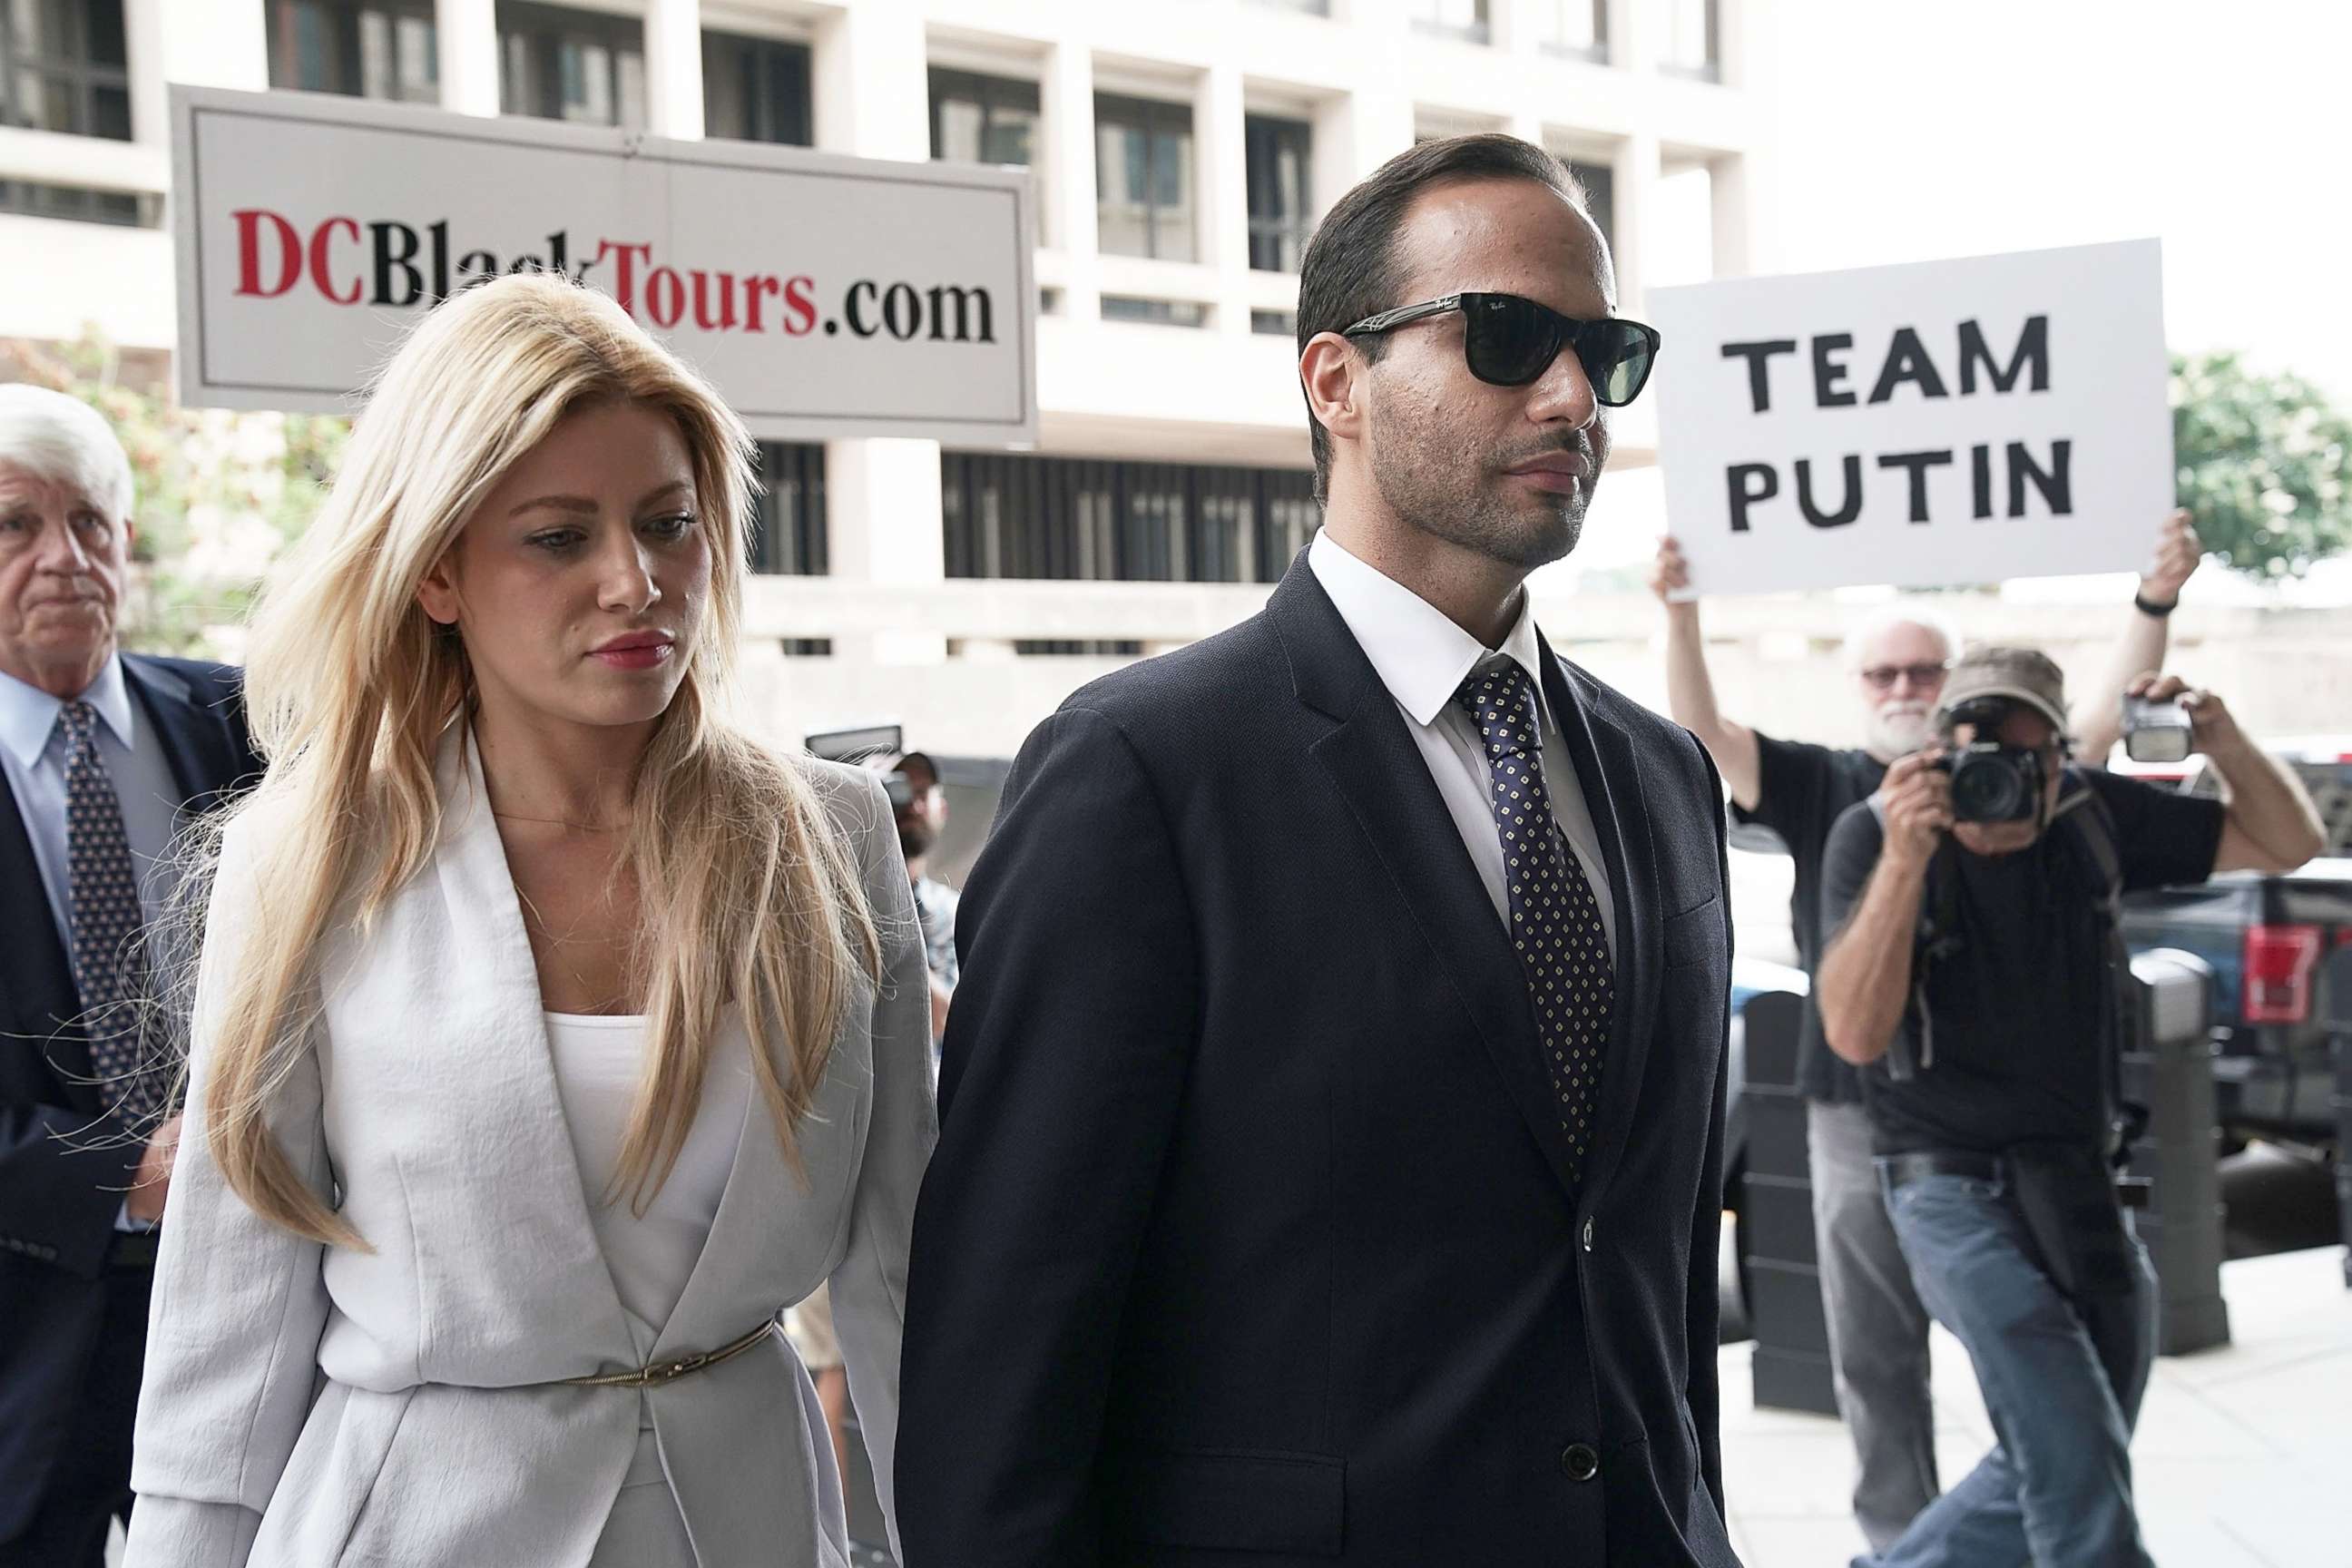 PHOTO: Former Trump Campaign aide George Papadopoulos arrives with his wife Simona Mangiante at the U.S. District Court for his sentencing hearing Sept. 7, 2018 in Washington, DC.